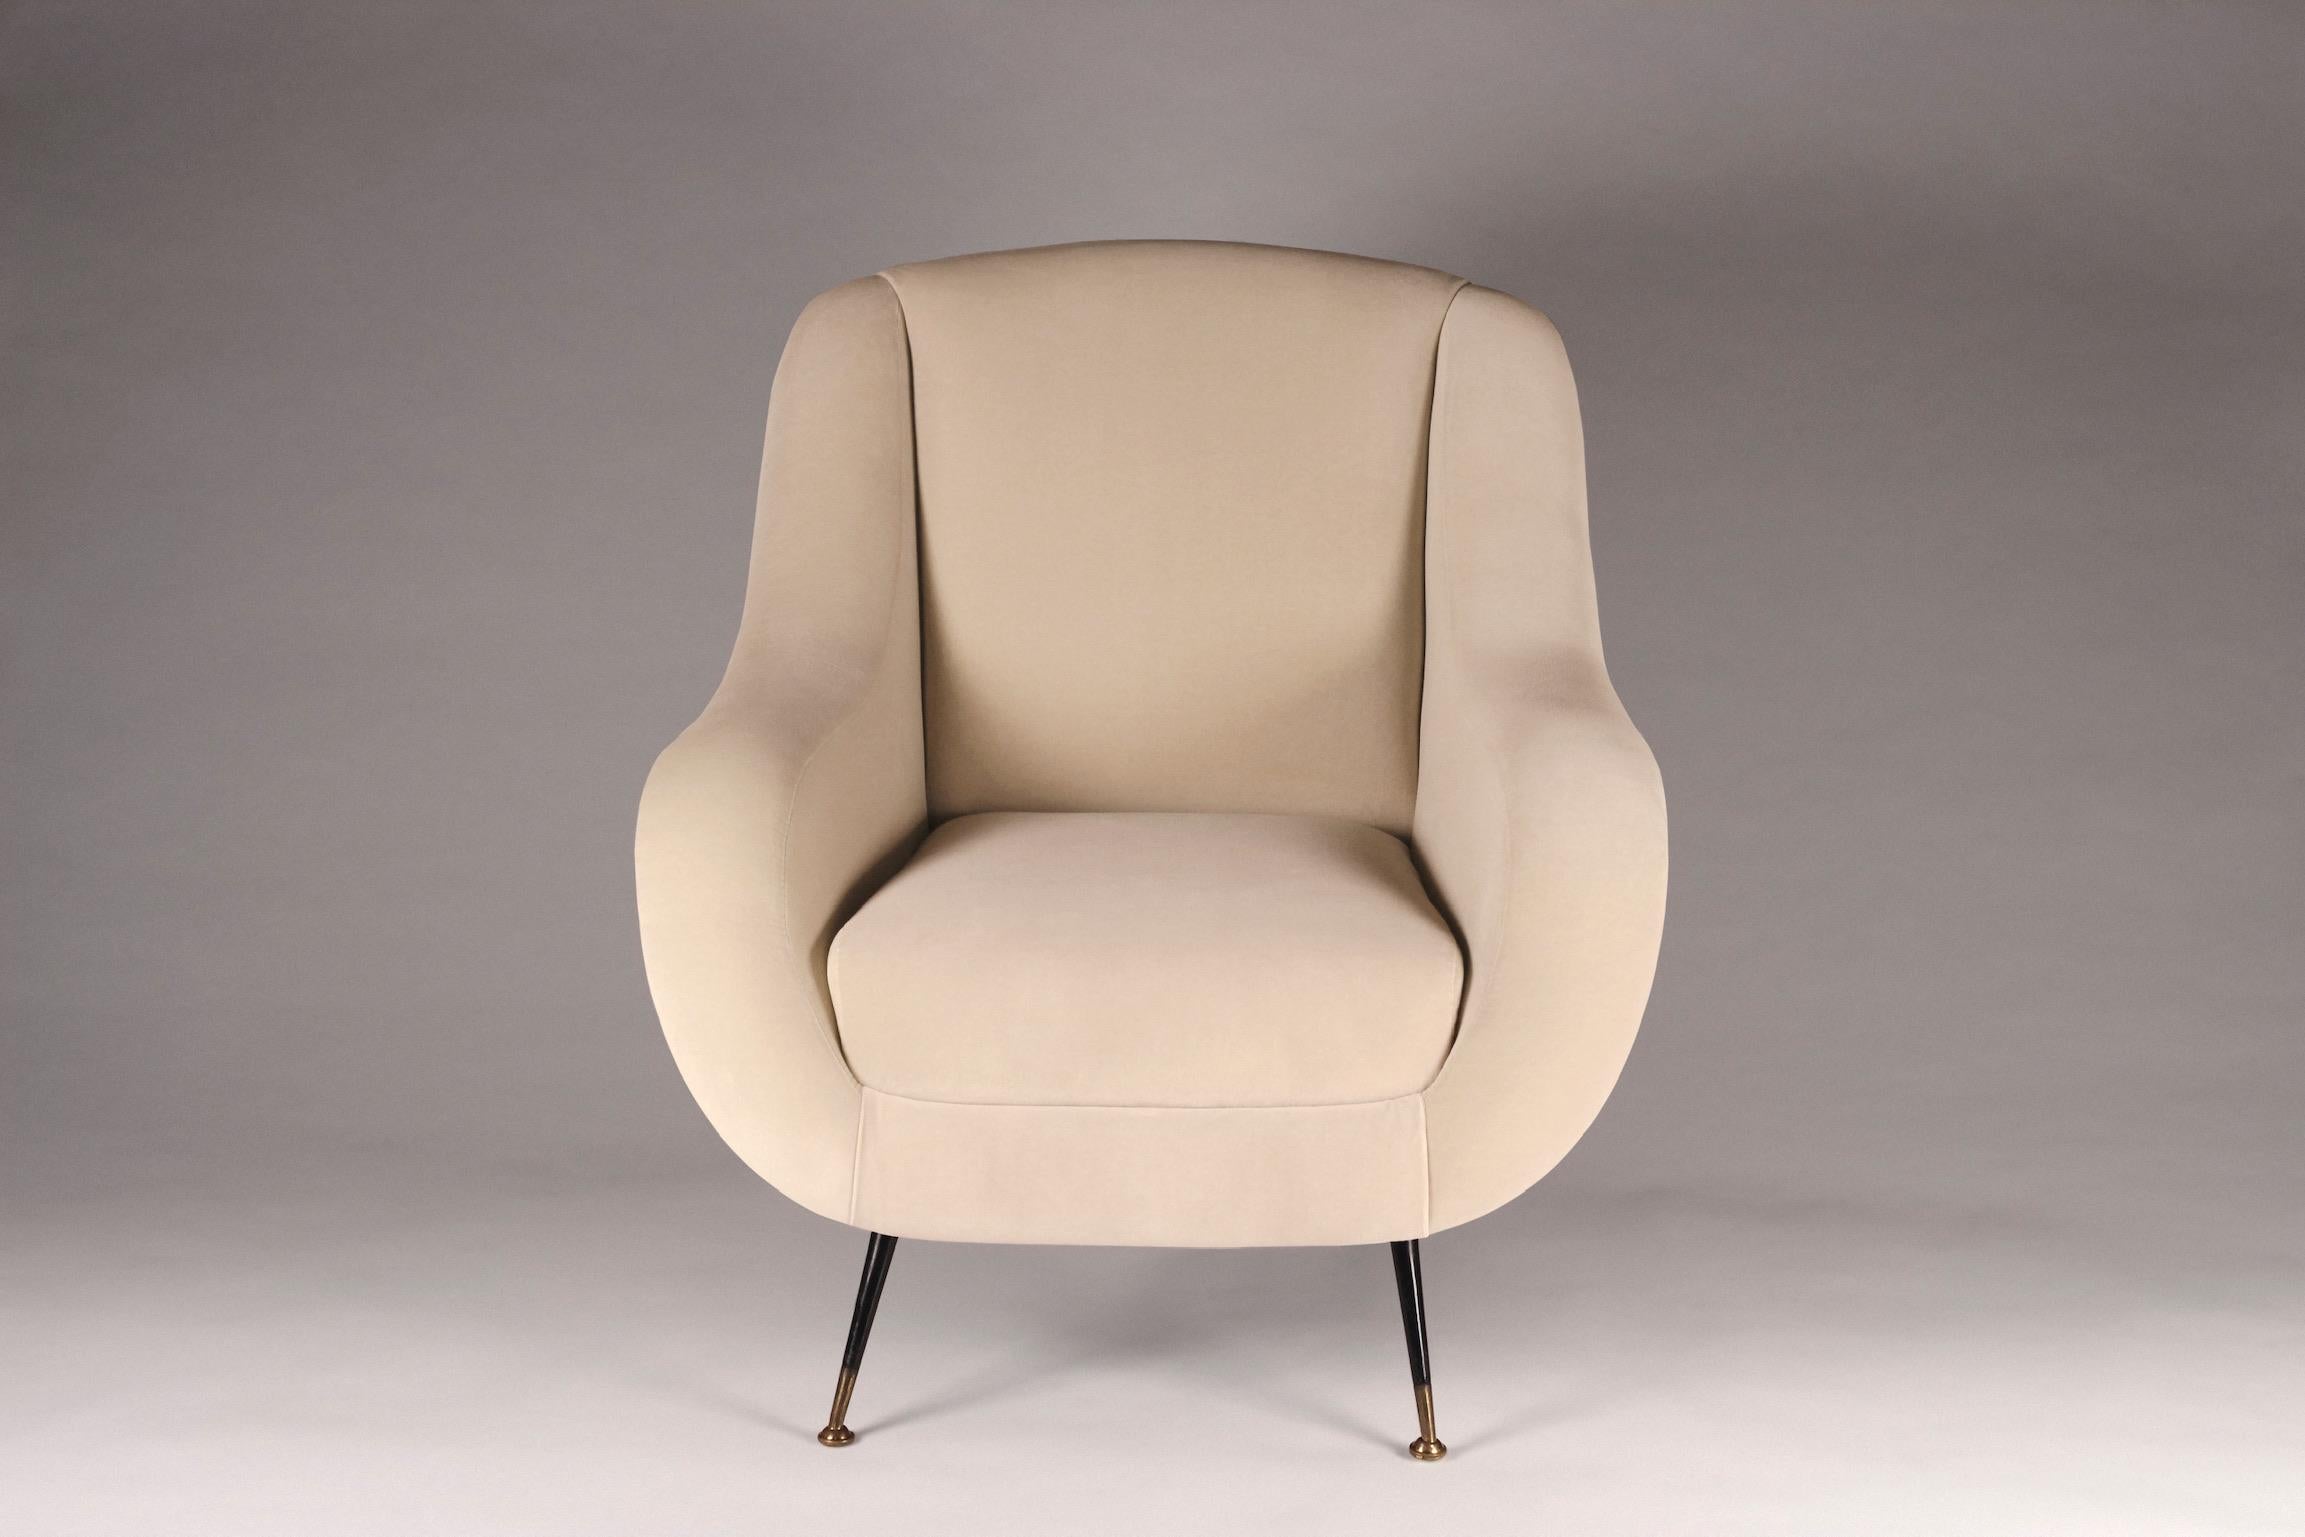 Sophia was inspired by stylish Italian design from the 1950s and is now created by English craftsman for the 21st century. We developed a lounge chair with the option of producing any number to your fabric specification. The price quoted is based on